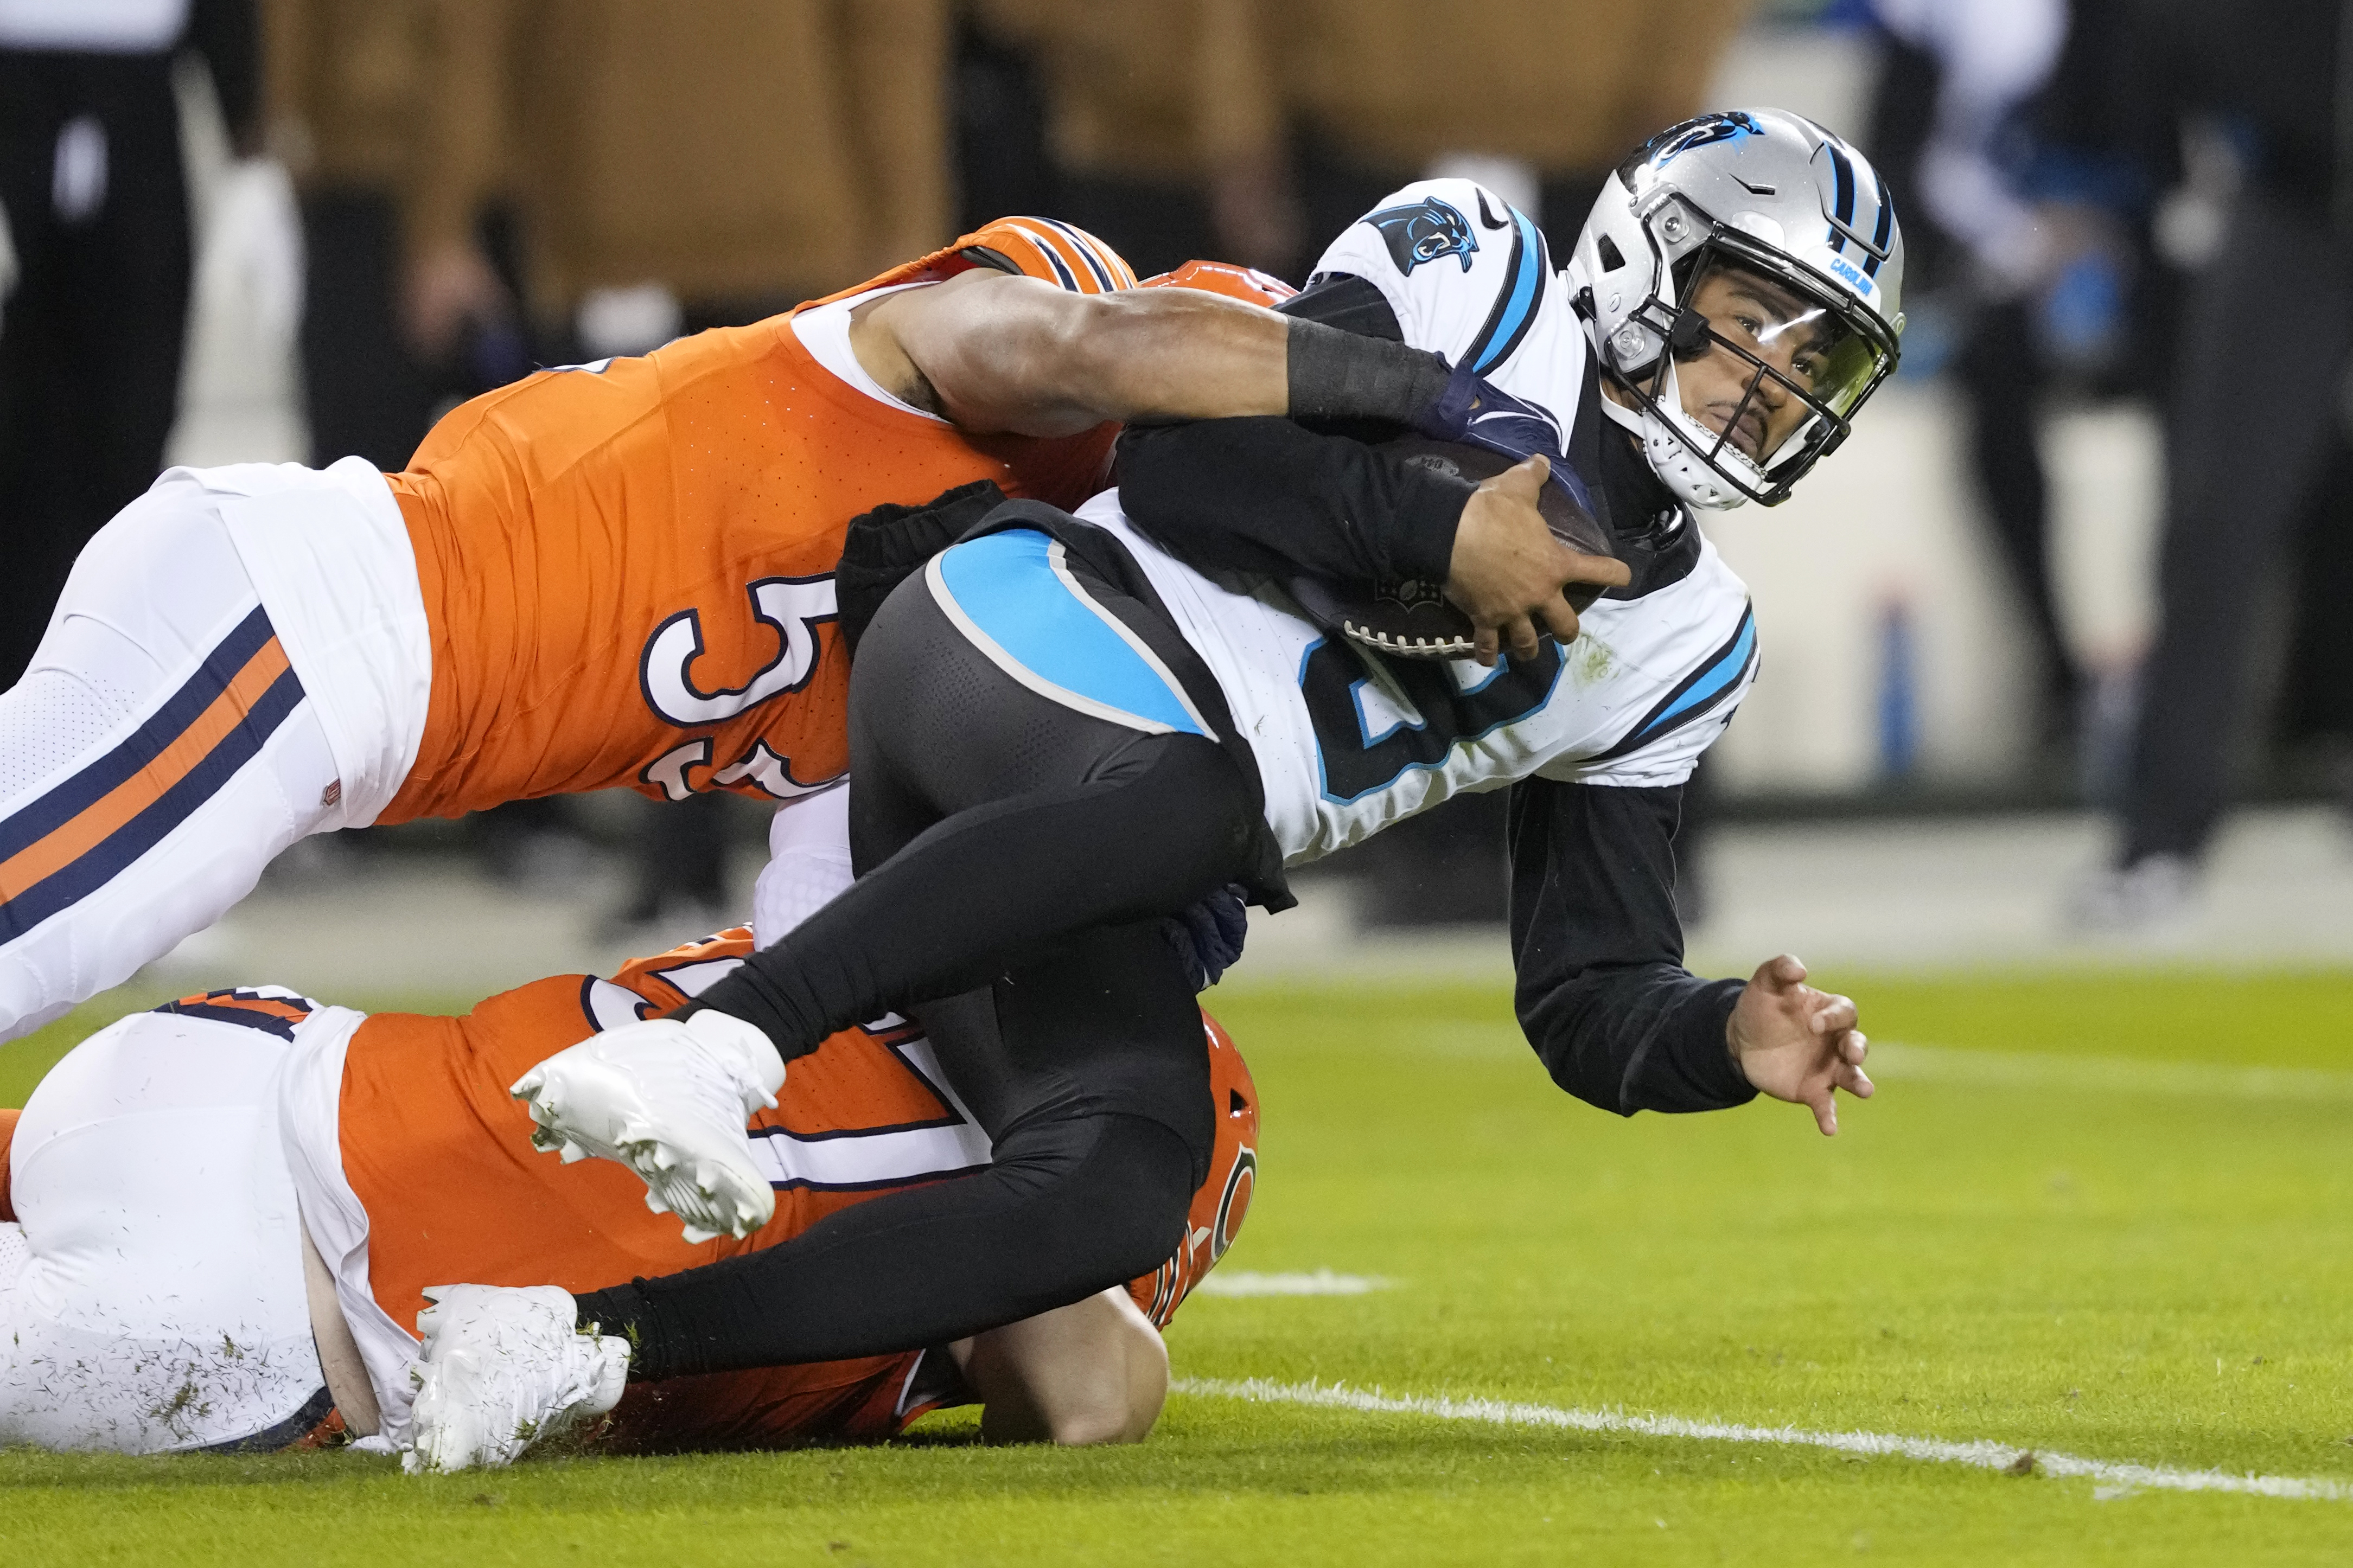 Chicago Bears manage to get the best of Carolina Panthers on